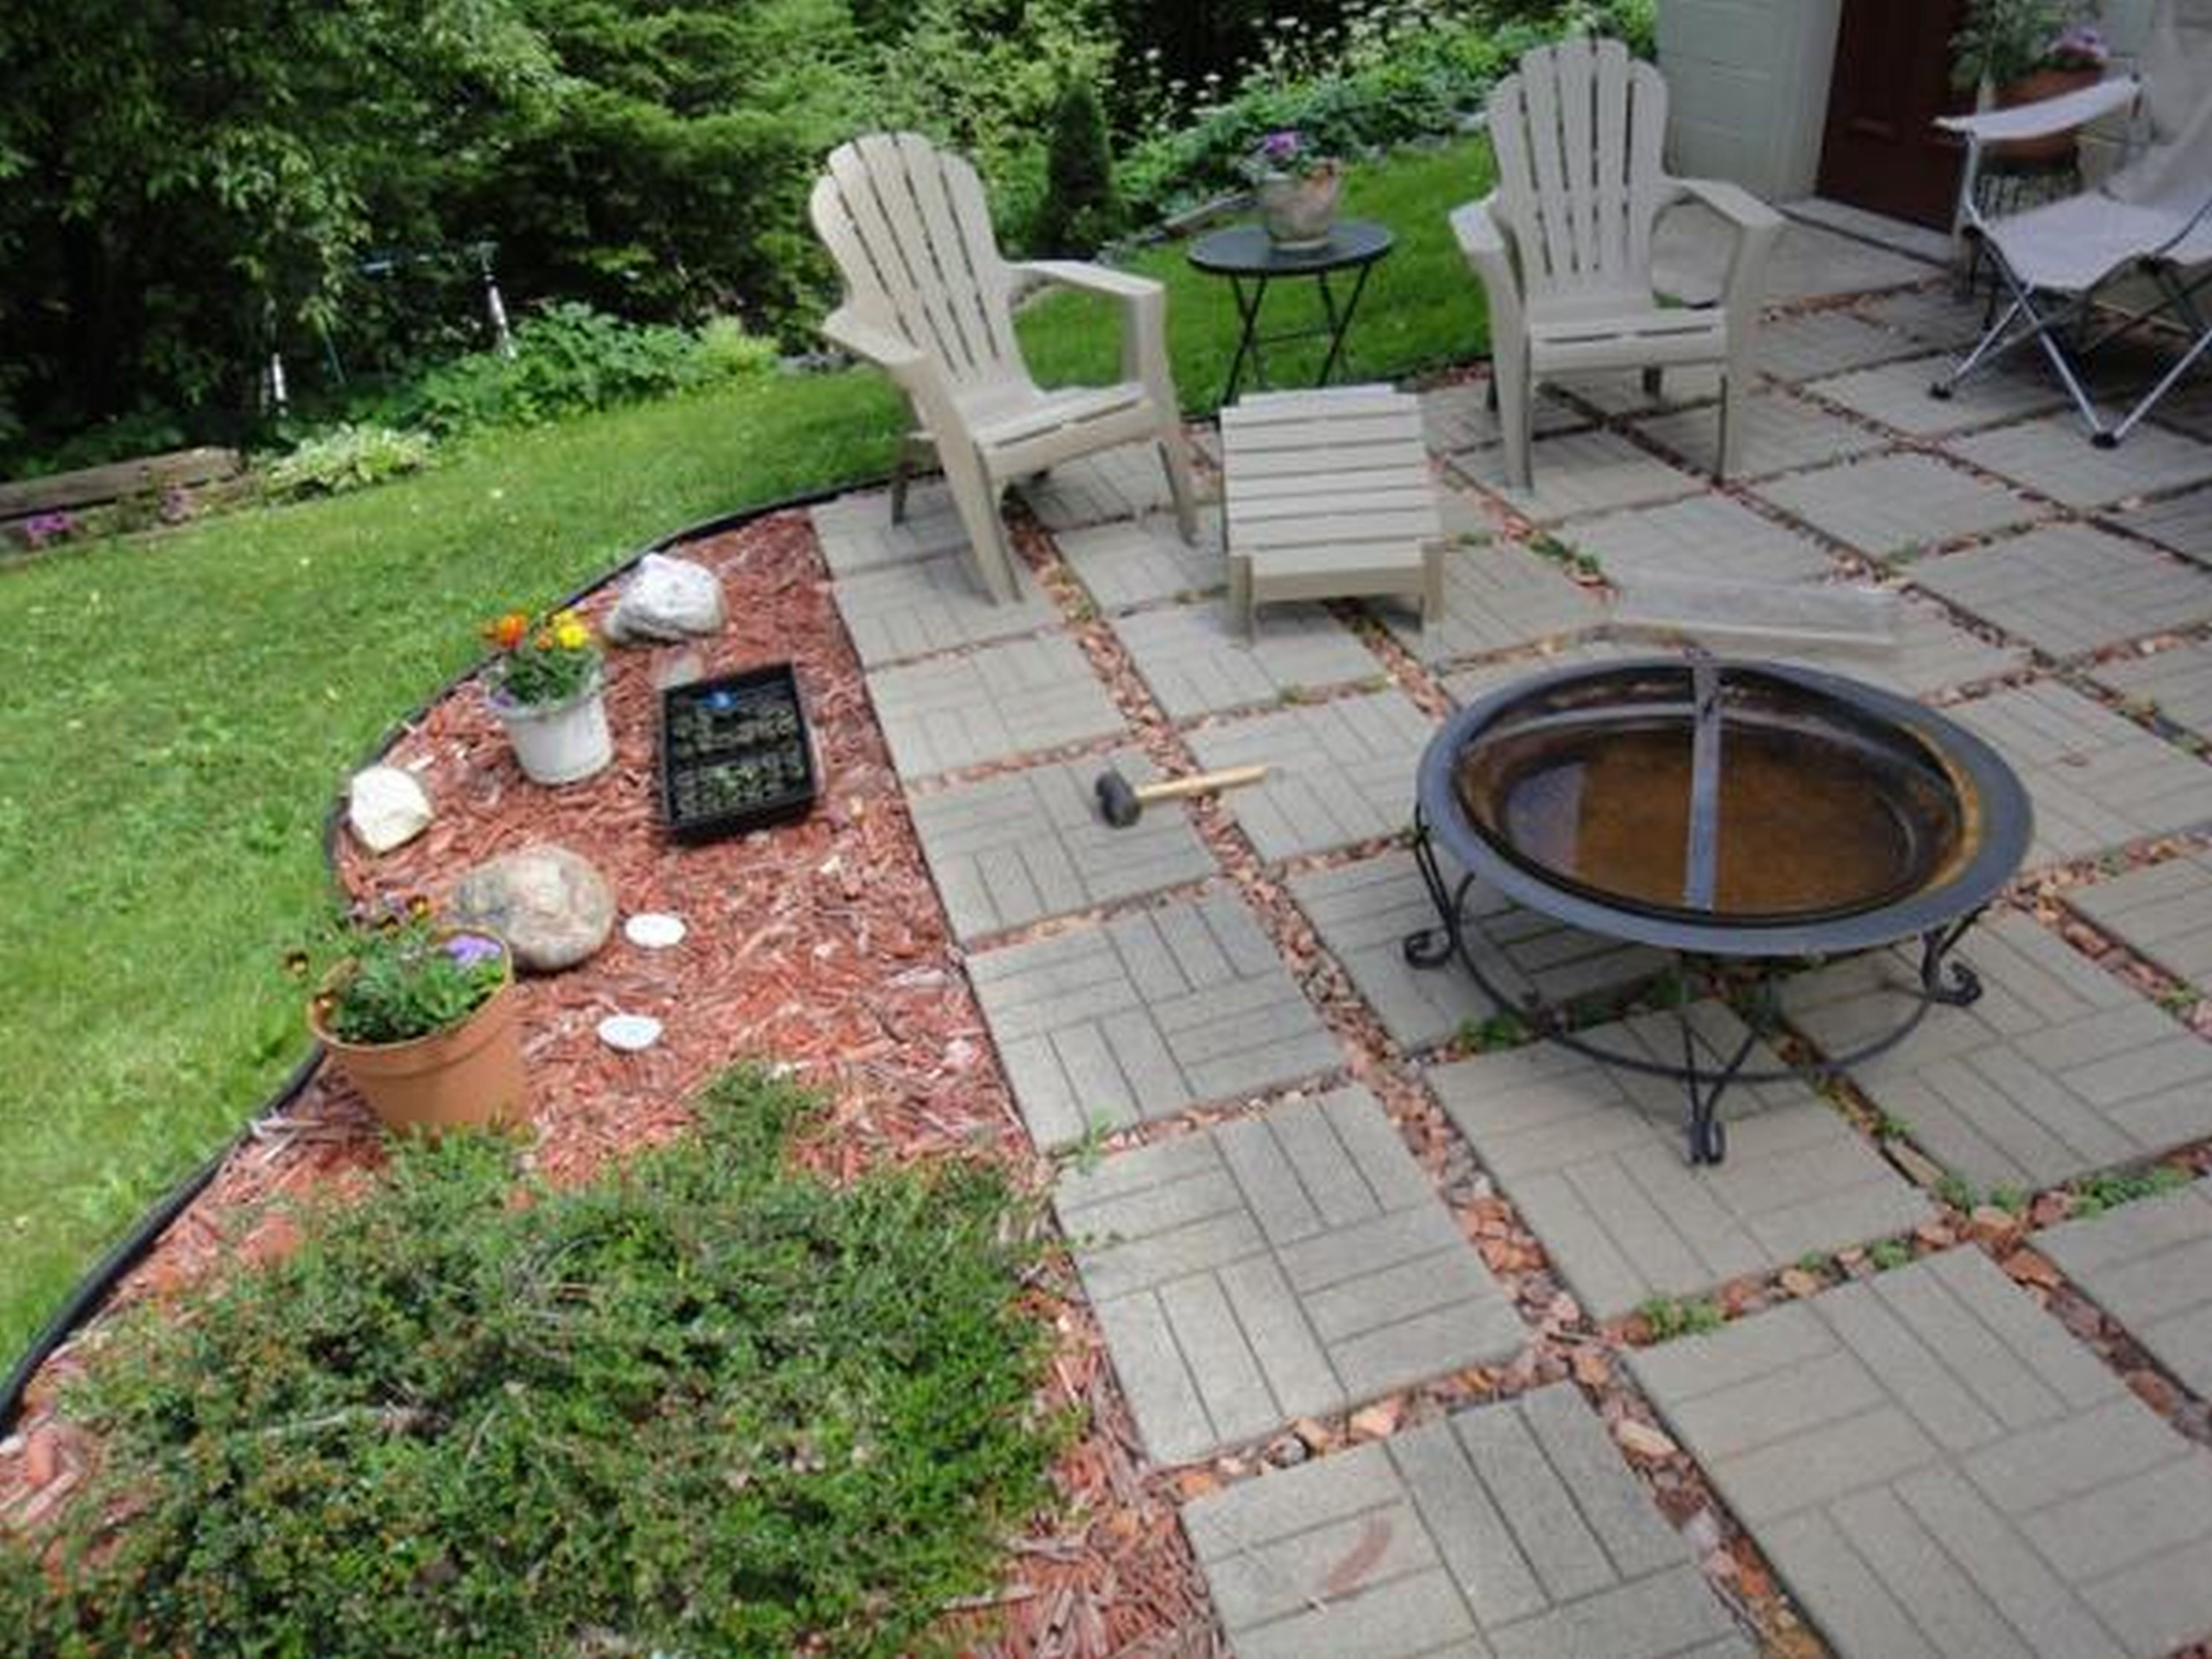 10 Awesome Yard Ideas On A Budget landscaping ideas on a budget amazing back yard fire pit ideas 2023